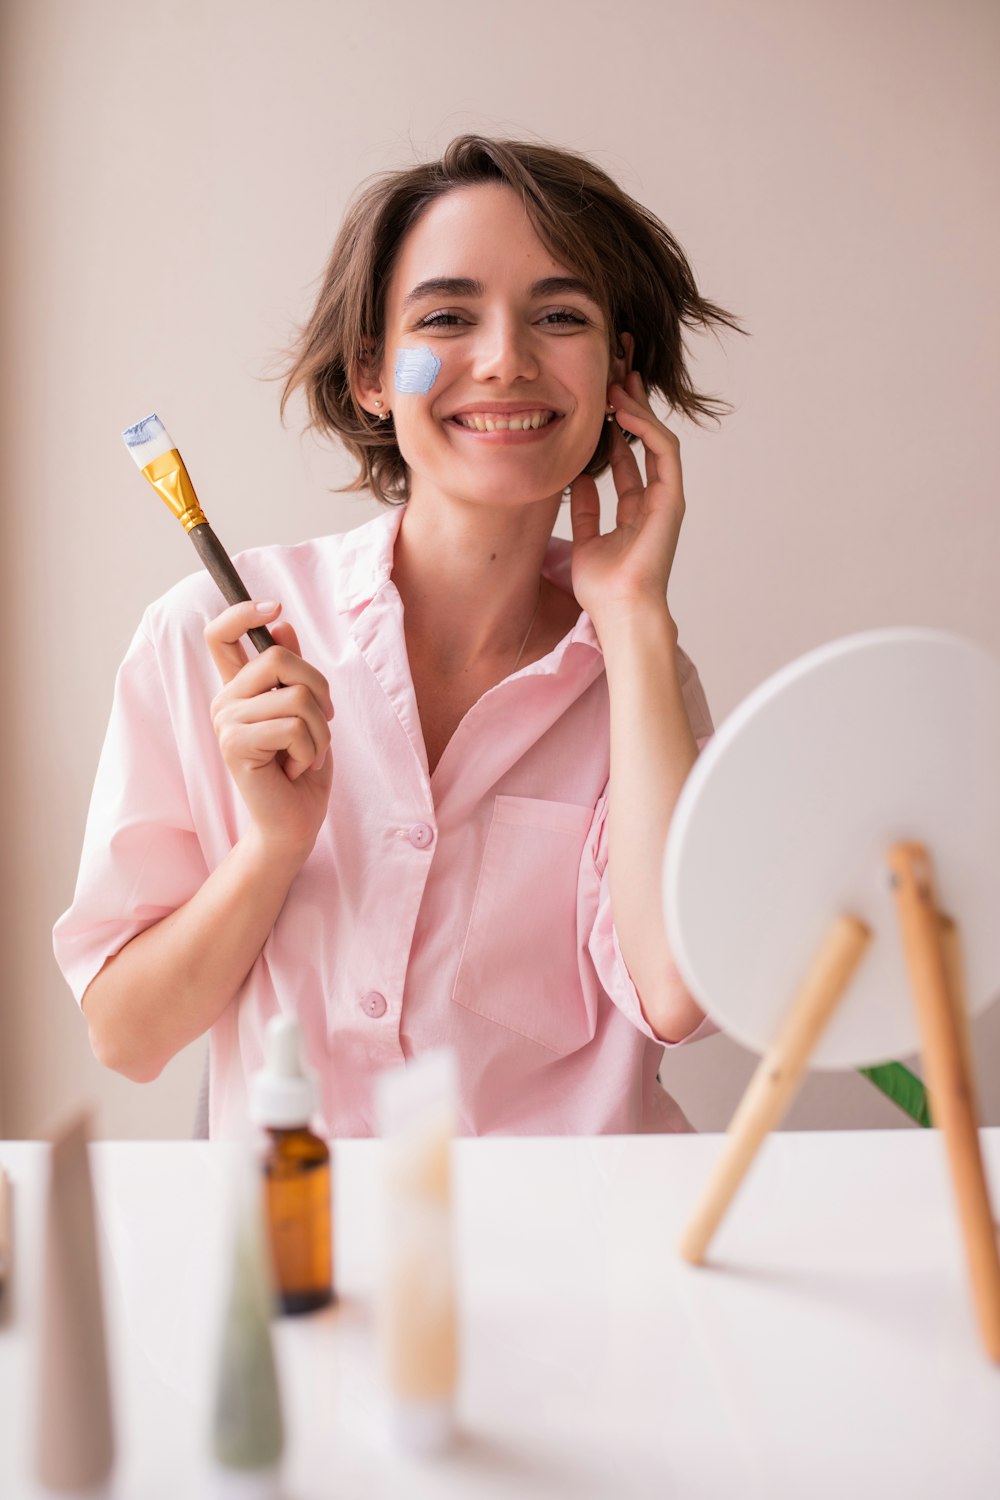 a woman is holding a brush and smiling